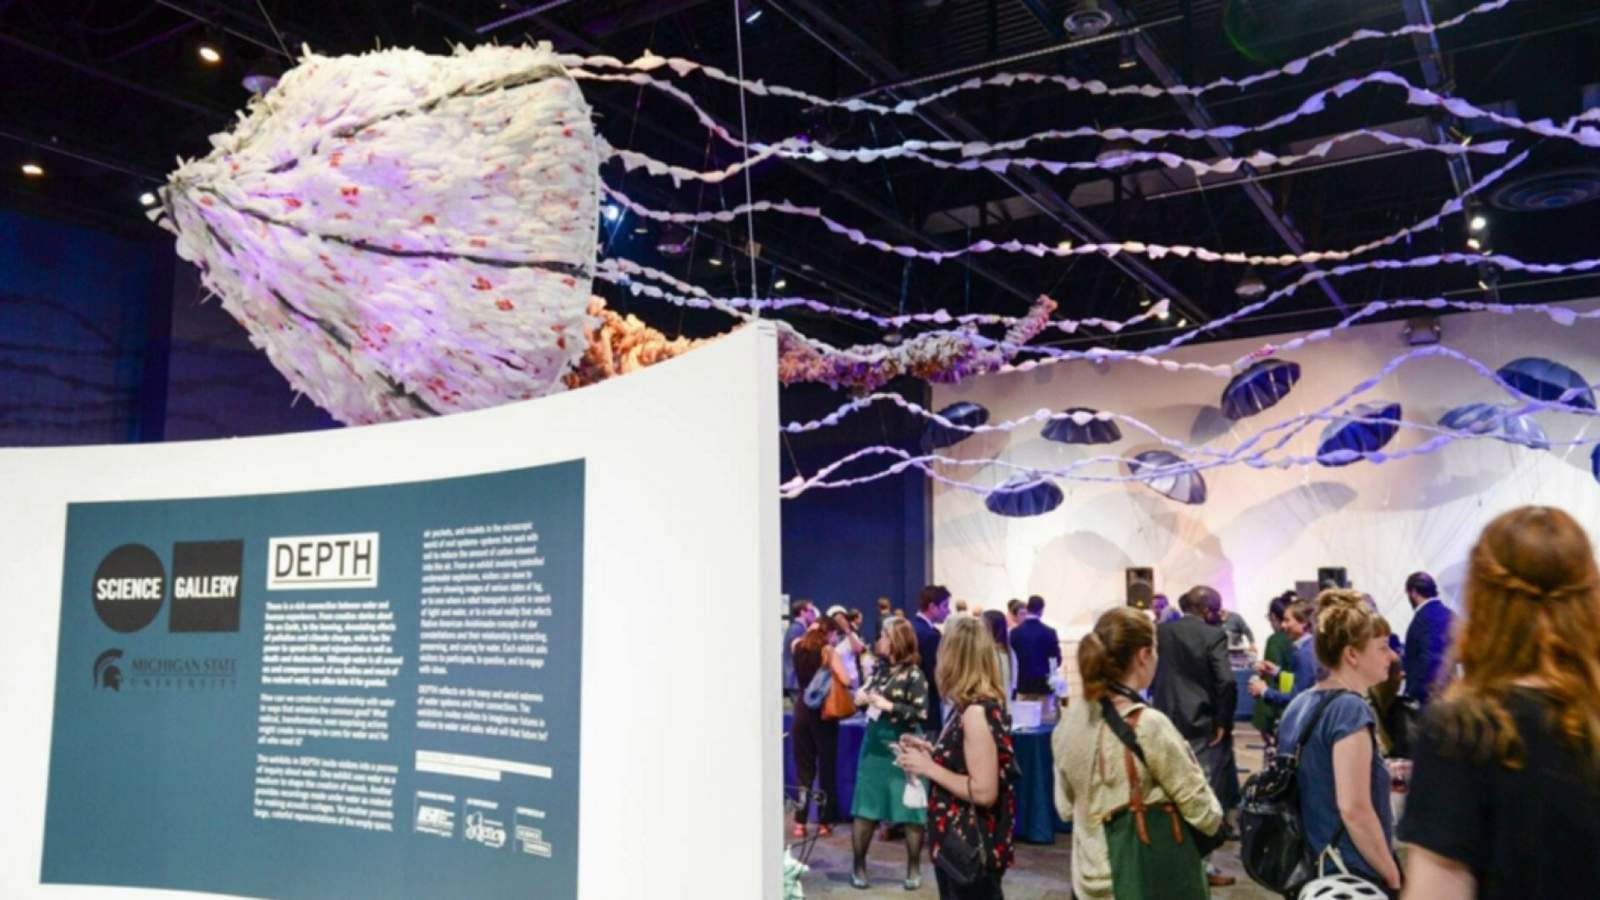 Watch art, science and technology come to life at this celebration in Detroit